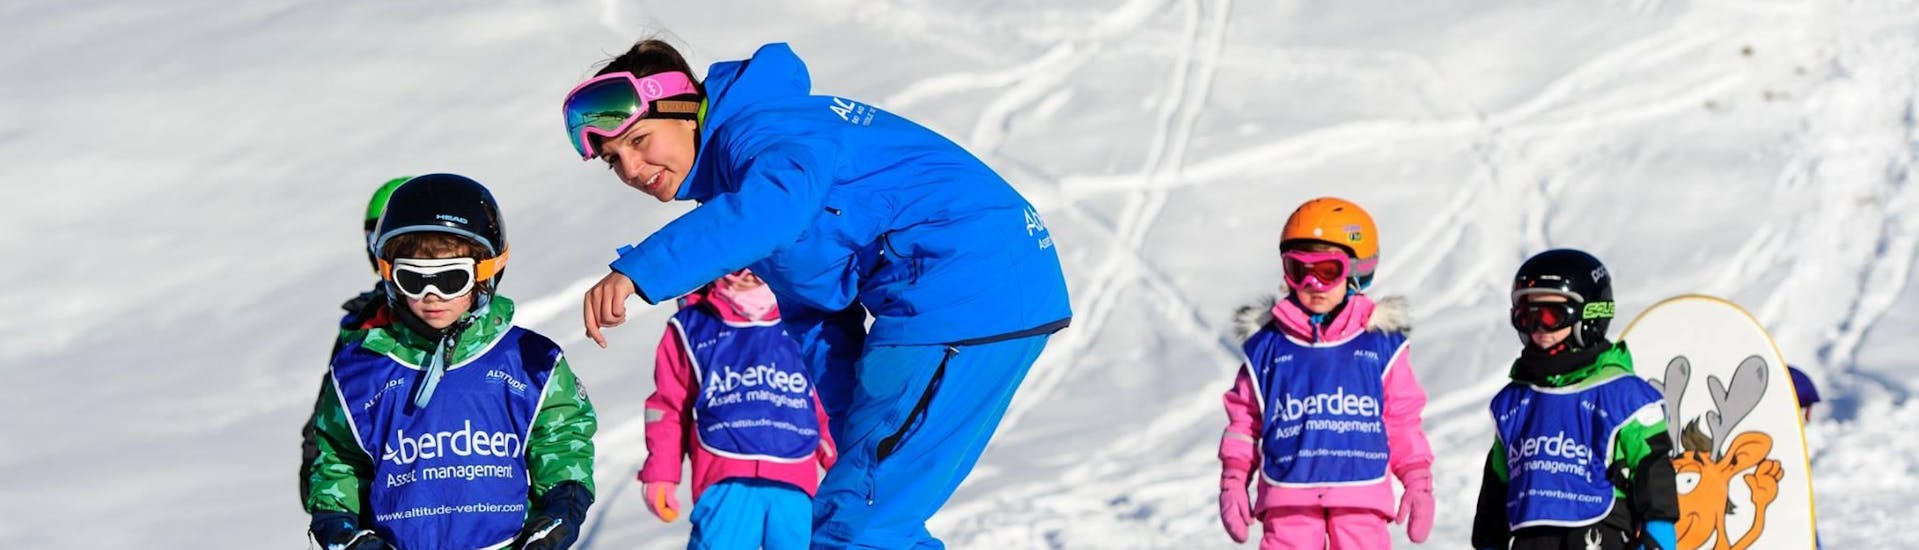 A ski instructor shows a child the correct technique at the kids ski lessons "Polar Bears" (3-5 yrs) for all levels with the Altitude Ski School Zermatt.